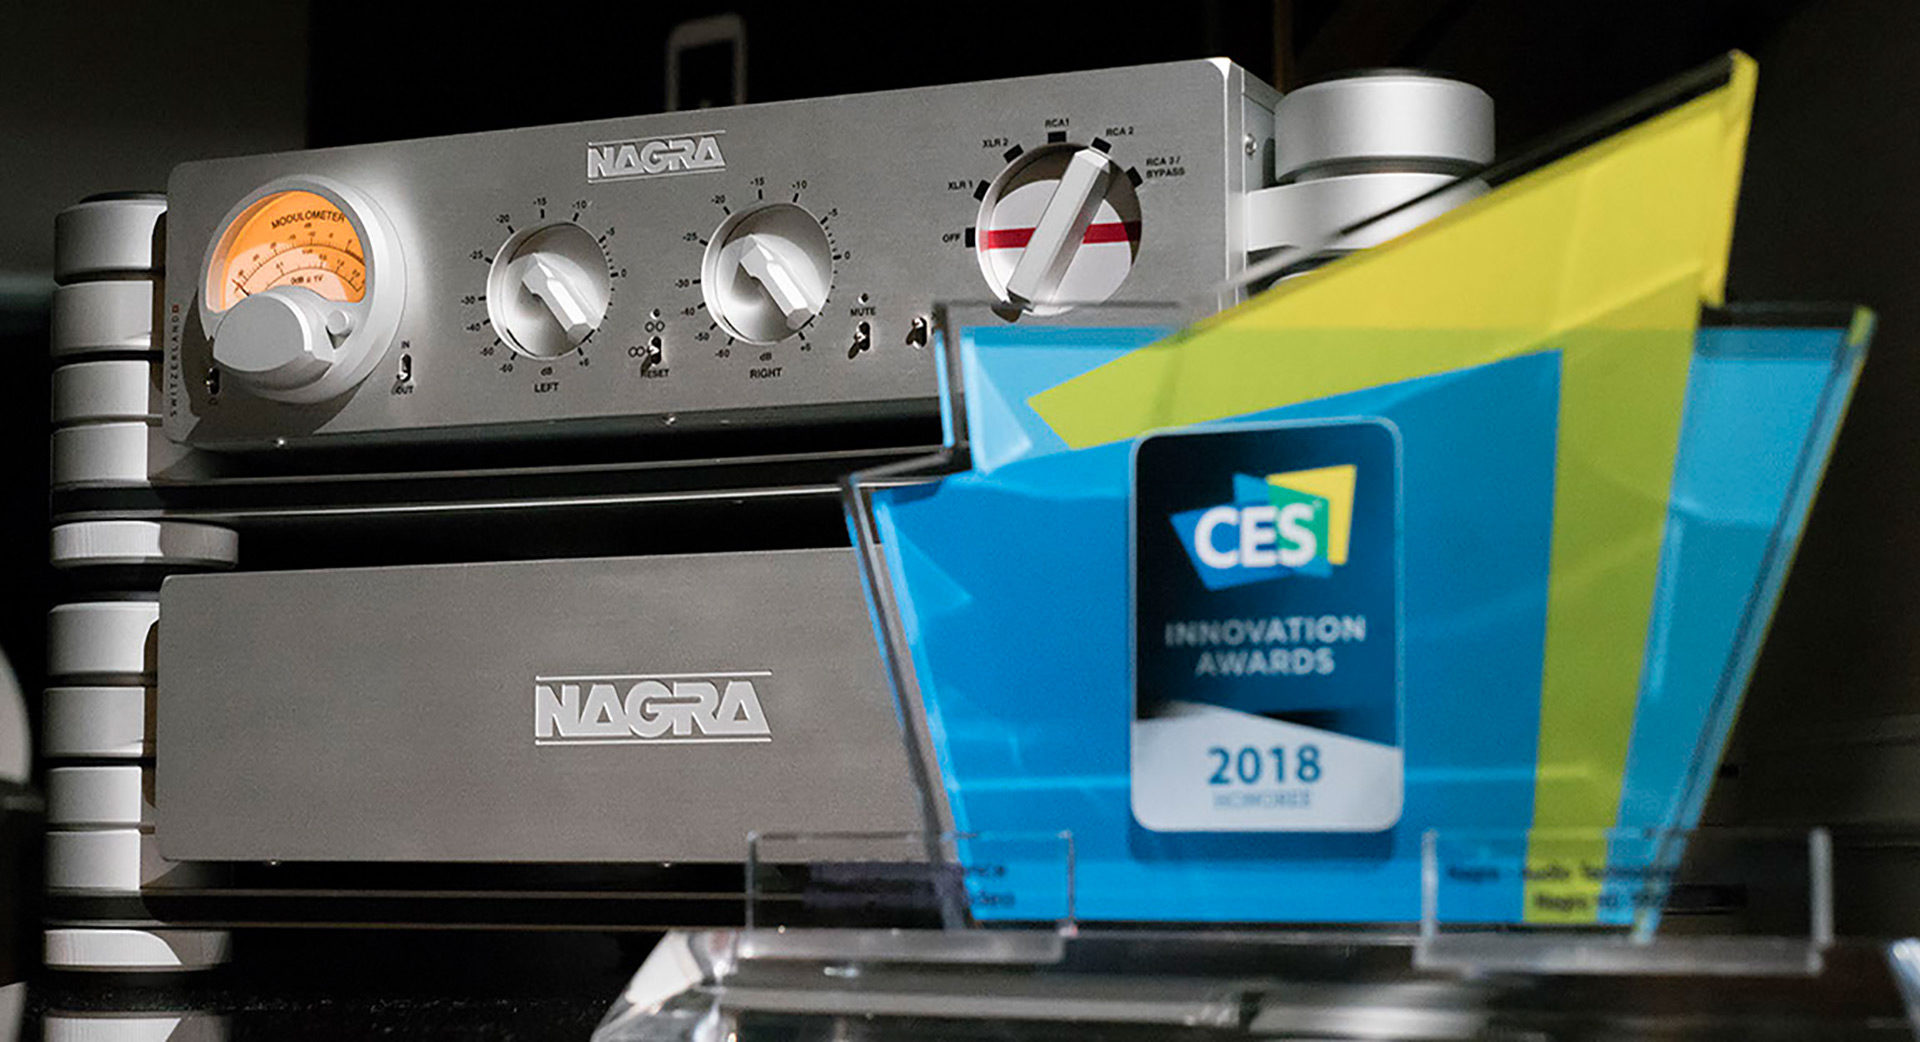 HD PREAMP CES innovation honoree award 2018 achievement